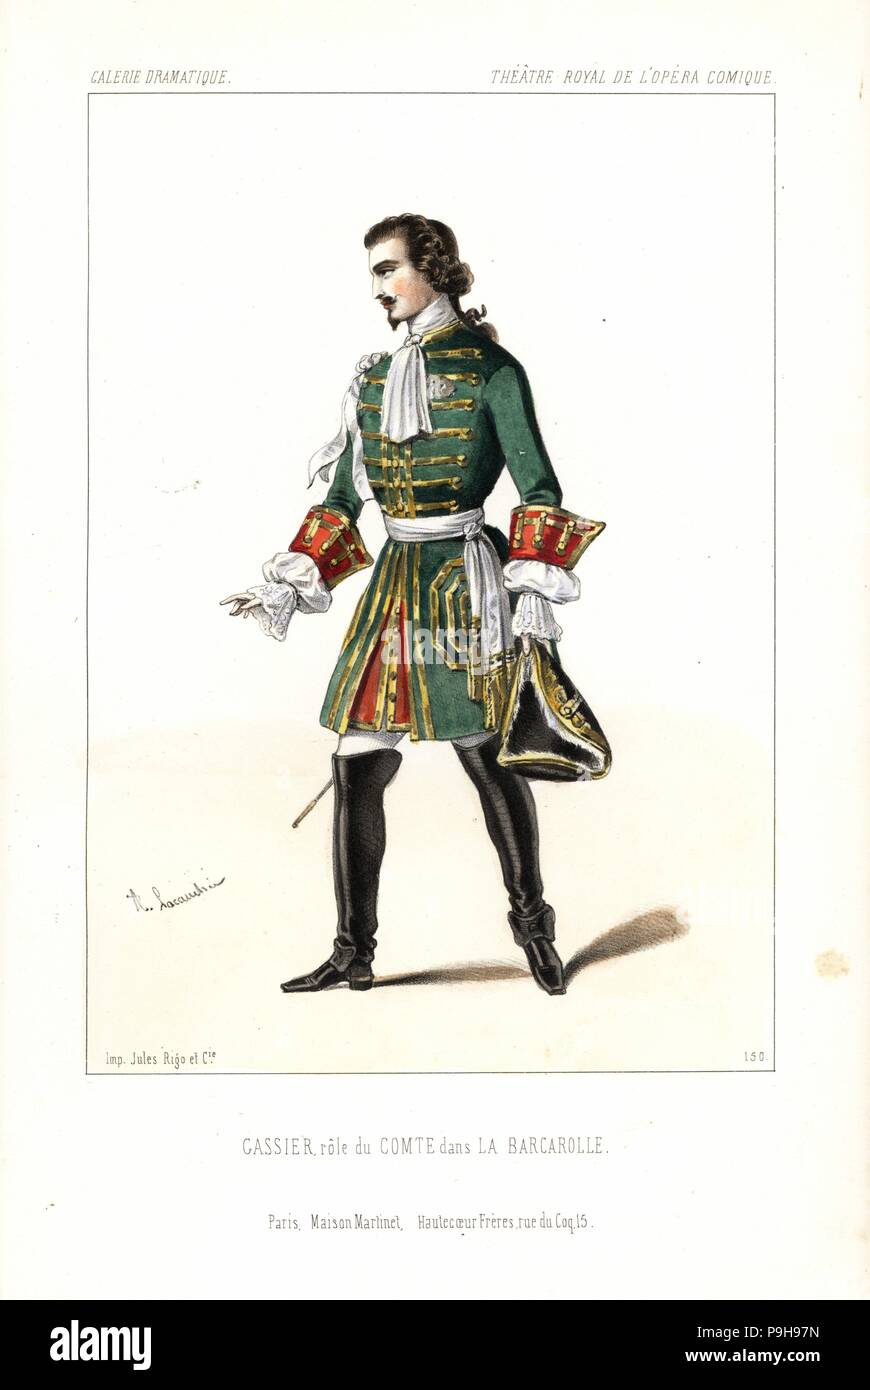 Bass-baritone Edouard Gassier in the role of the Comte in Auber's La Barcarolle, Opera Comique, 1845. Handcoloured lithograph after an illustration by Alexandre Lacauchie from Victor Dollet's Galerie Dramatique: Costumes des Theatres de Paris, Paris, 1845. Stock Photo